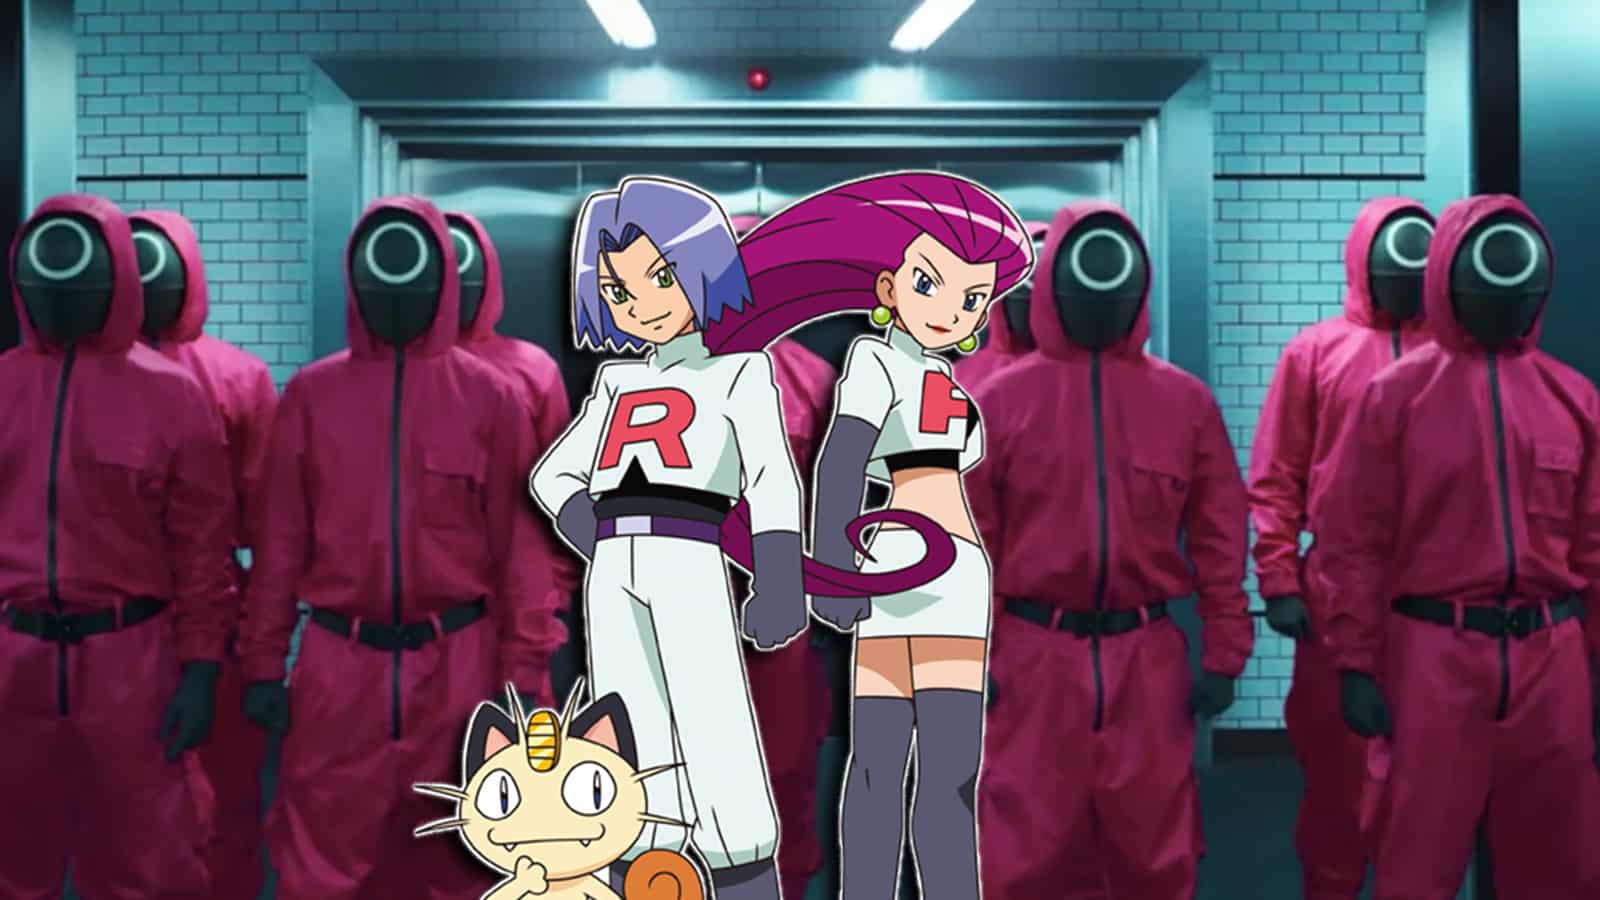 Squid Game soldiers next to Team Rocket Jessie and James from Pokemon anime